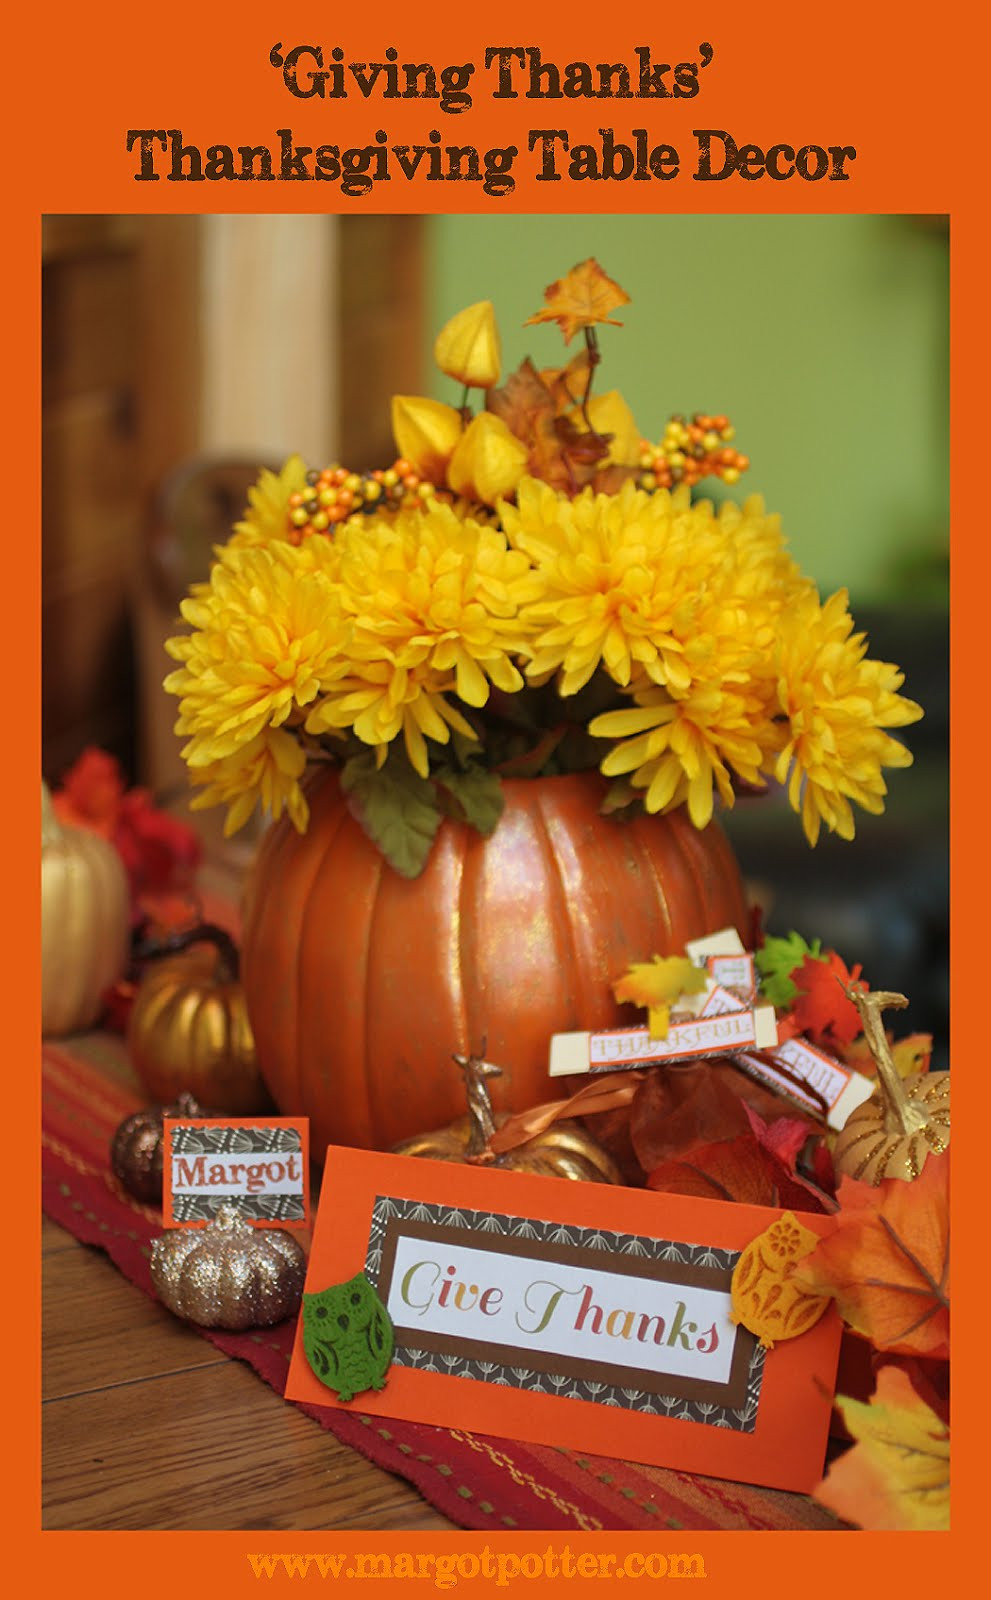 Diy Thanksgiving Table Decorations
 iLoveToCreate Blog Giving Thanks DIY Thanksgiving Table Decor